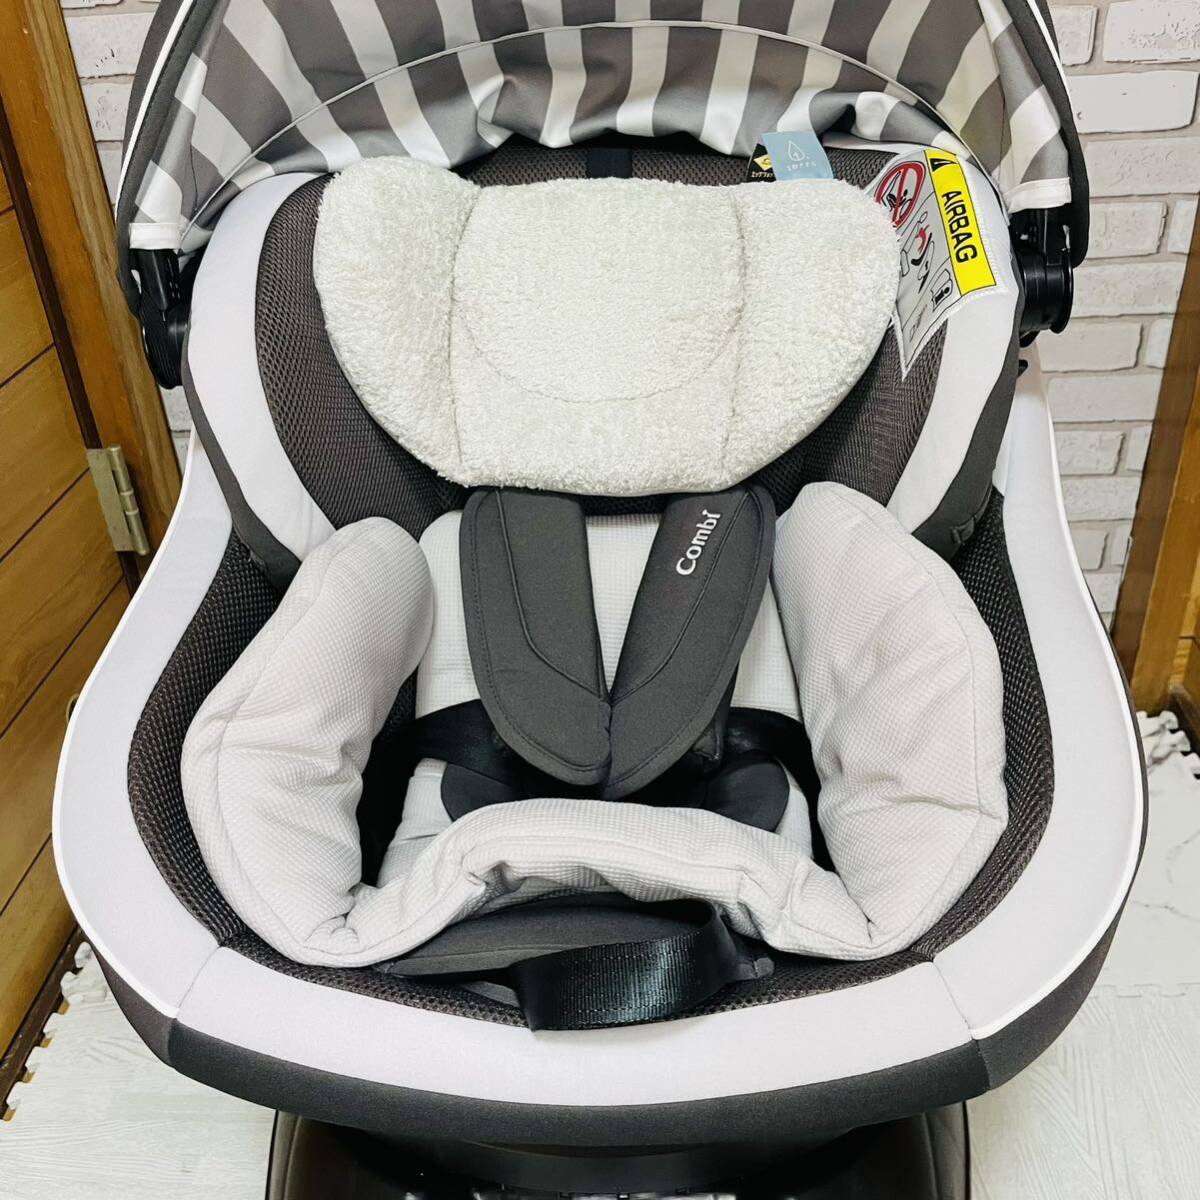  prompt decision use 4 months beautiful goods combikru Move Smart ISOFIX gray JK child seat postage included 5300 jpy . discounted lavatory settled combination 